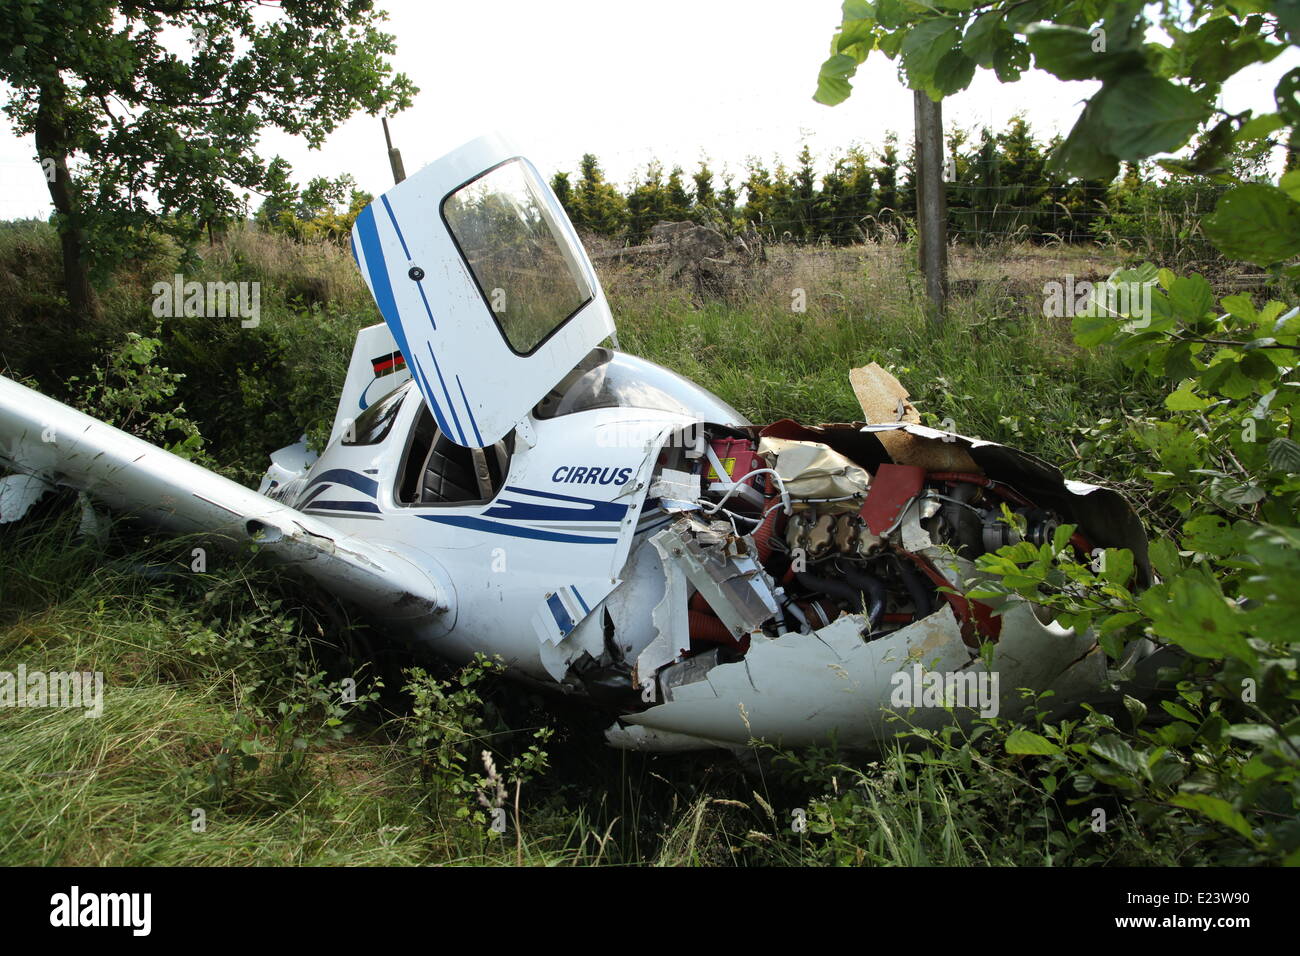 Westerstede-Felde, Germany. 15th June, 2014. A Cirrus SR20 small aircraft crashed after it approached for landing at the airfield in Westerstede-Felde, Germany, 15 June 2014. The four passengers suffered no harm. Photo: Florian Kater/dpa/Alamy Live News Stock Photo